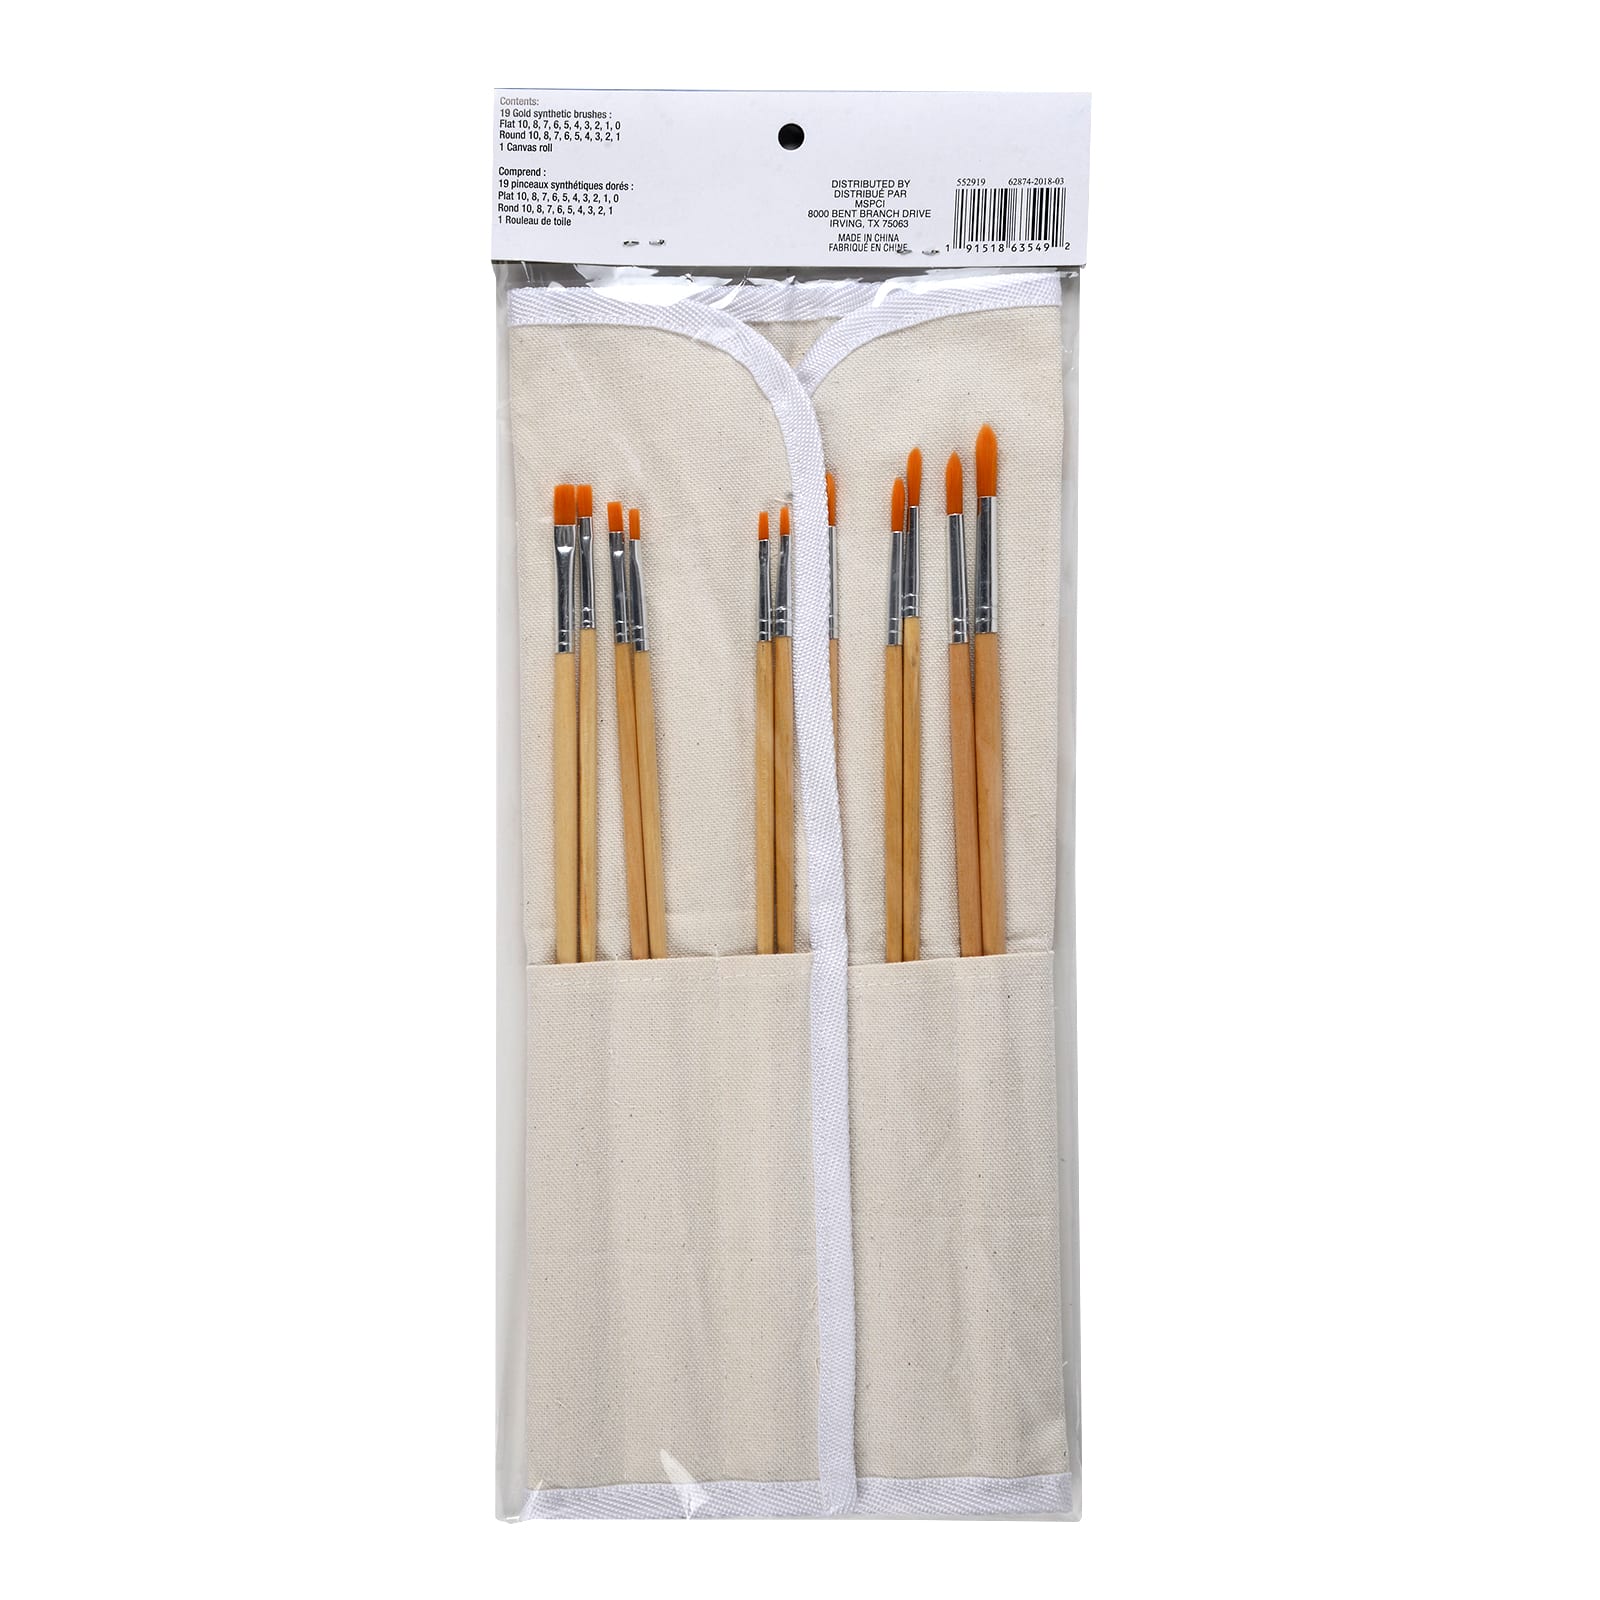 Pebeo Art and Craft Paint Brush Round & Flat Set of 8 for Deco and